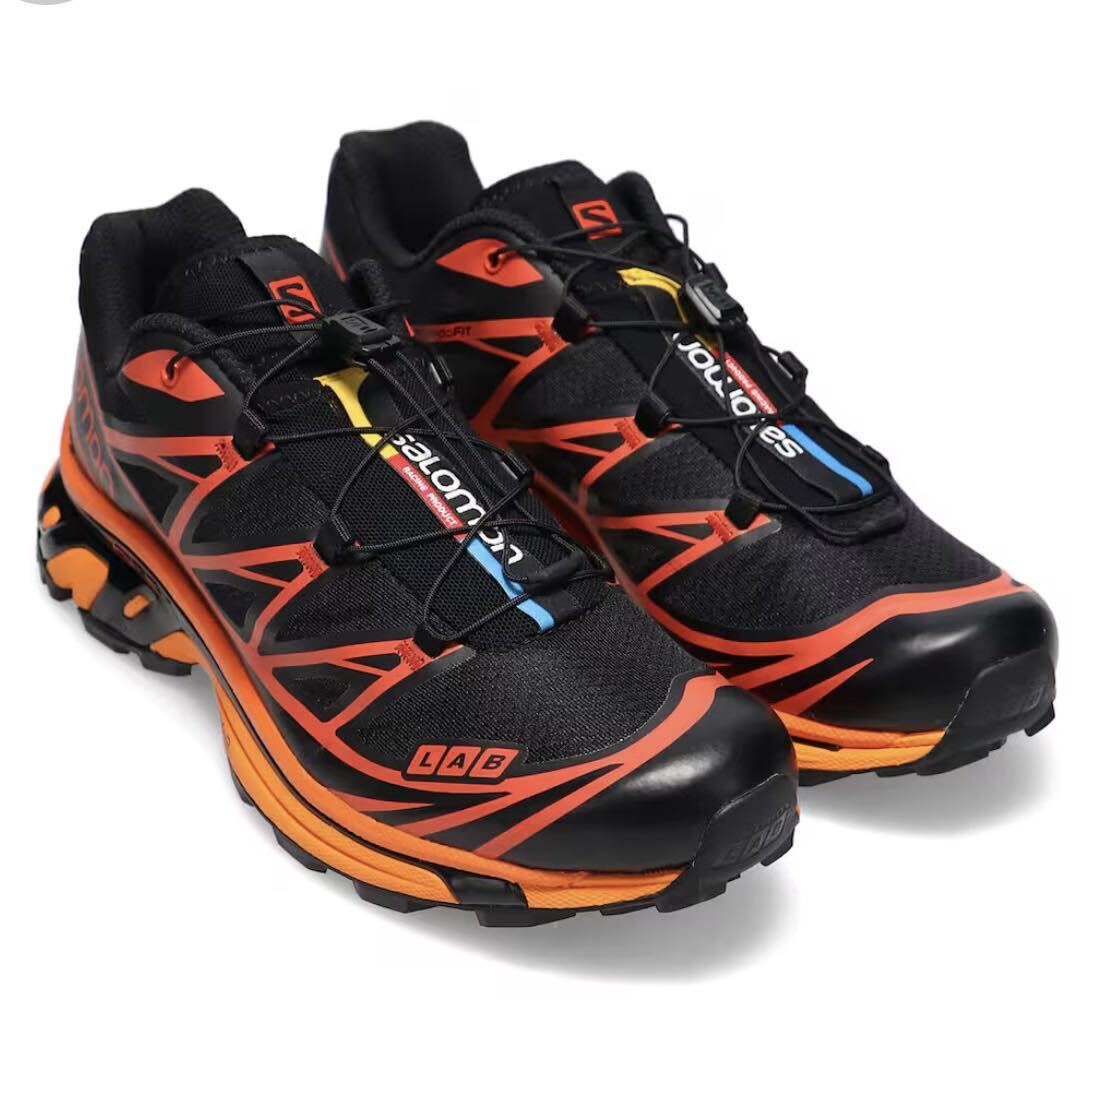 [MR PORTER online buy ] accessory equipping [ statement of delivery attaching ]SALOMON XT-6 Black / Chocolate Pulm / Vibrant Orange size 27cm US9.0 ultimate beautiful goods 